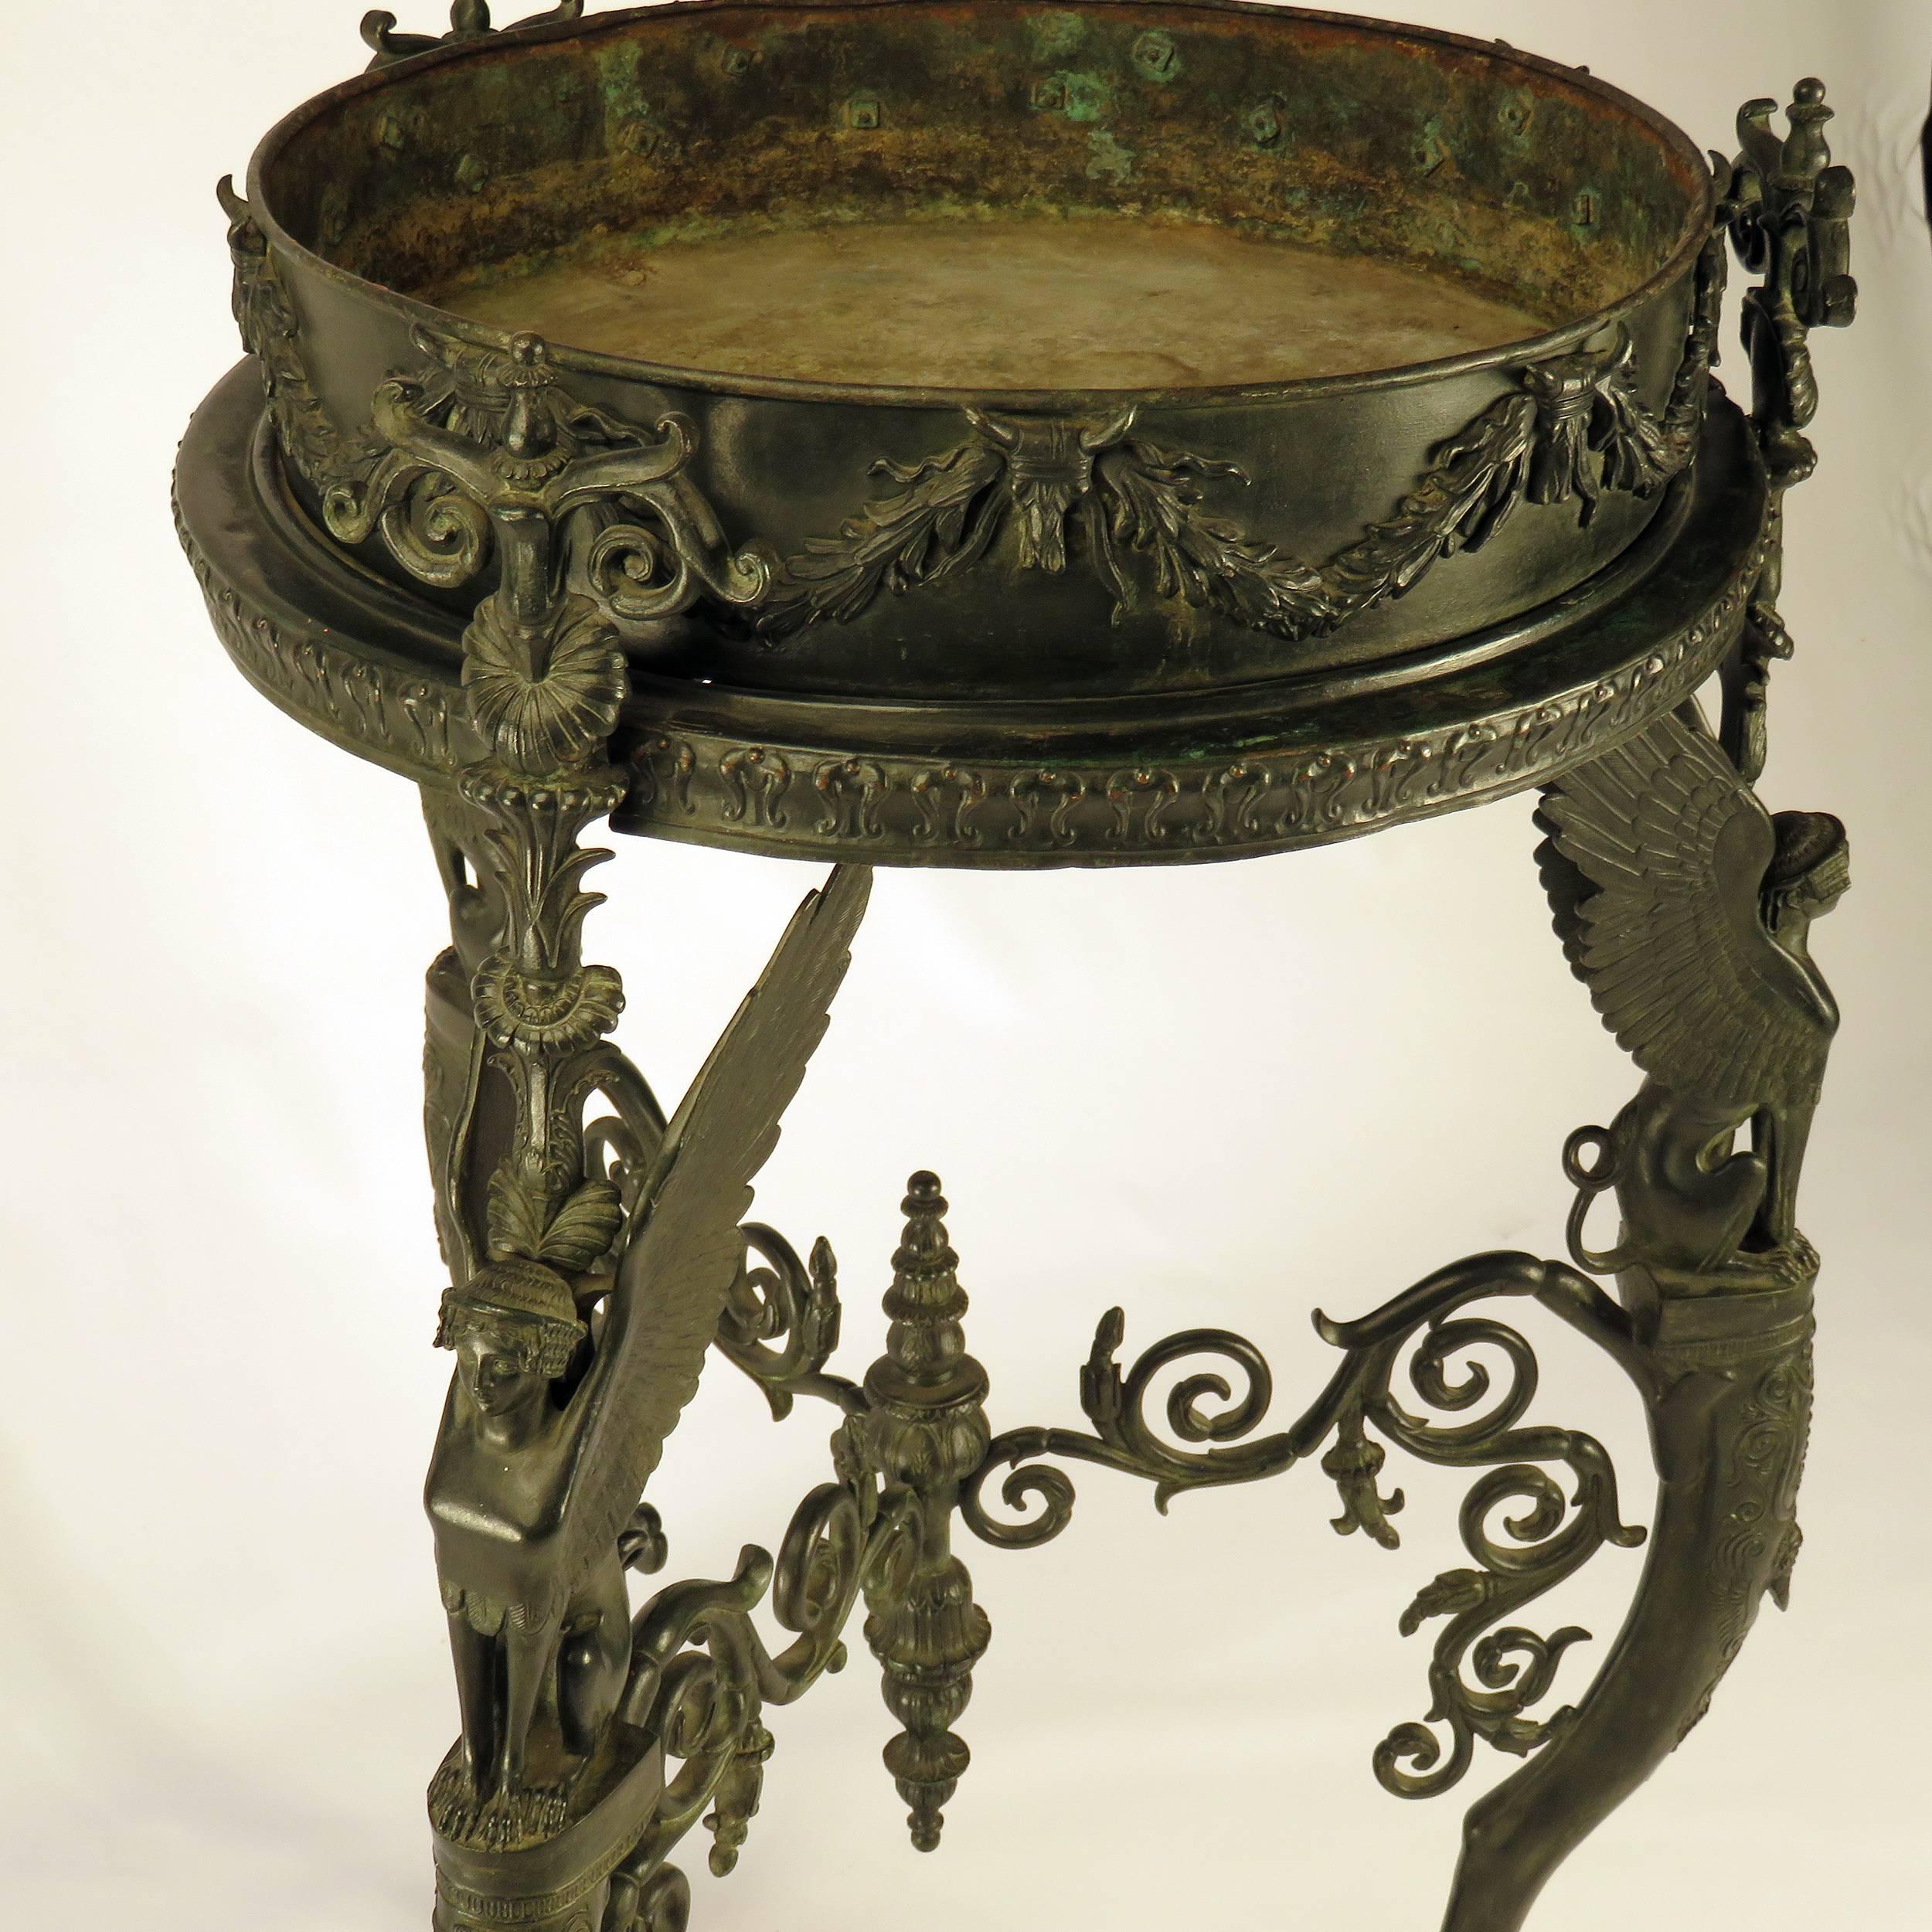 A 19th century patinated bronze stand, Athienienne, based on a Roman original found at Pompeii. A matching tripod was used at the baptism of Napoleon's son, the king of Rome. This type of stand was copied during the 18th-19th centuries. This example